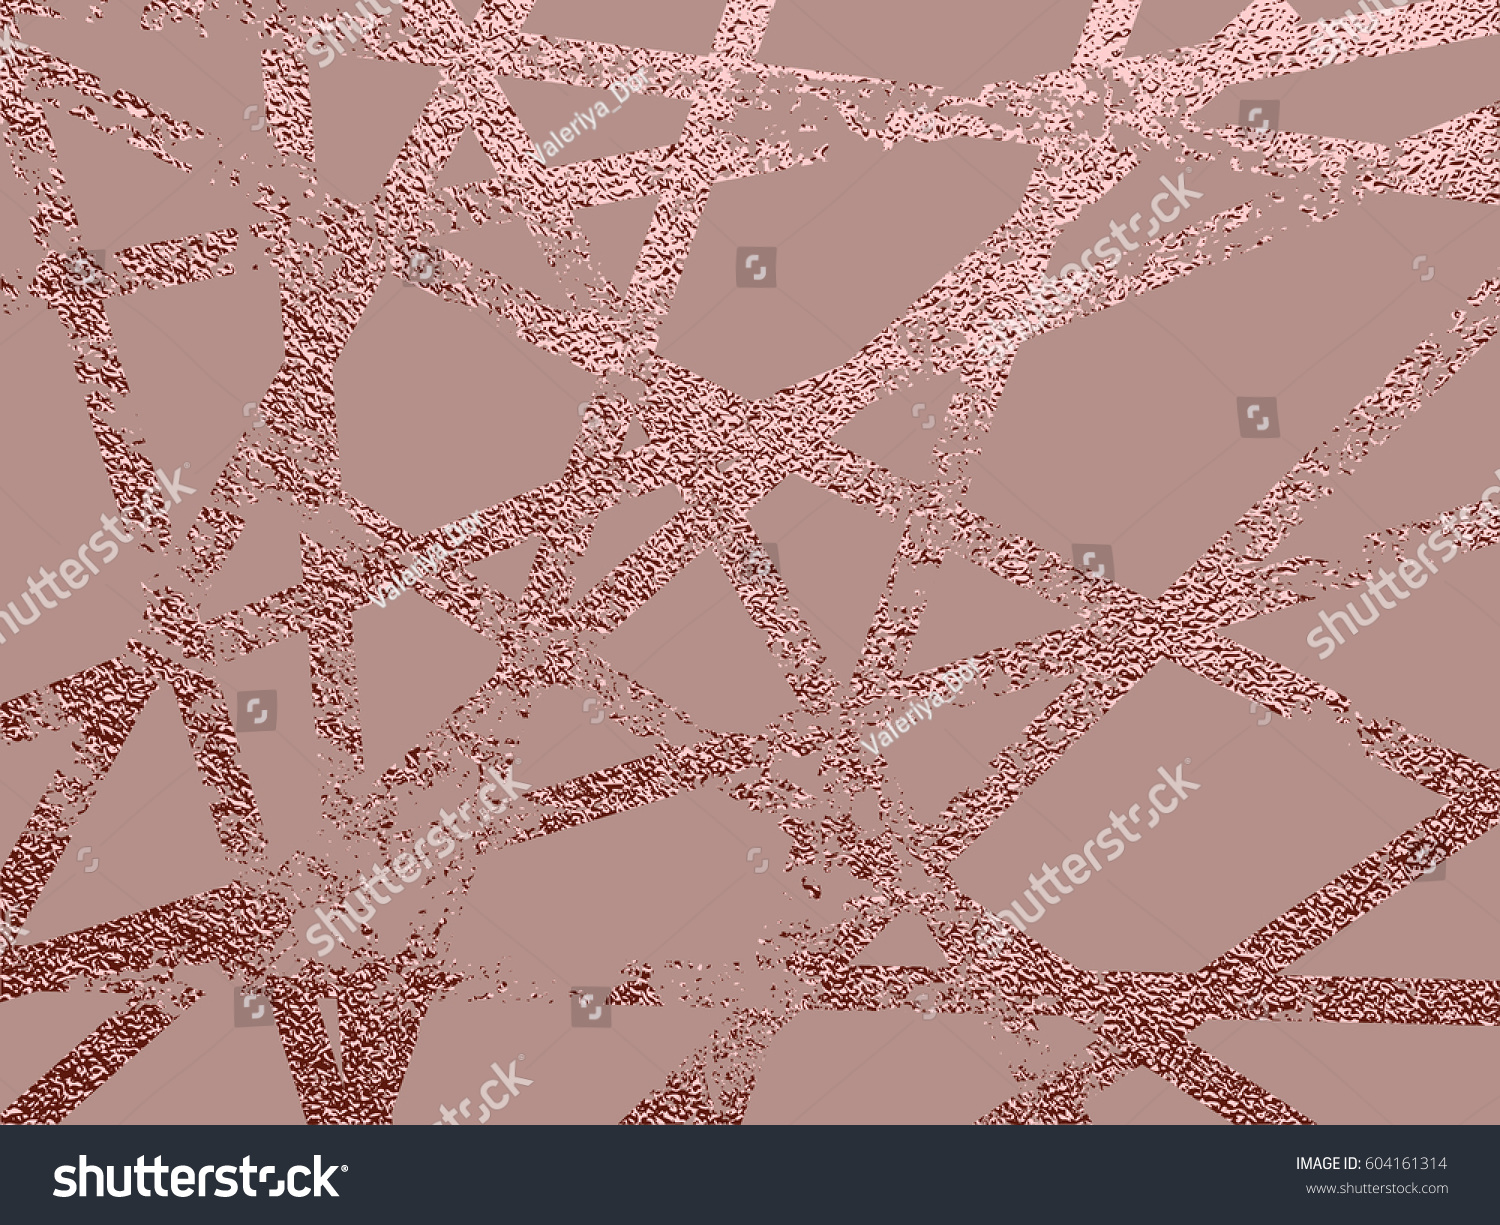 SVG of Gold Metallic glossy texture. Rose quartz pattern. Abstract shiny background. Luxury sparkling background. Trendy template for holiday designs, party, birthday, wedding, invitation, web, banner card svg